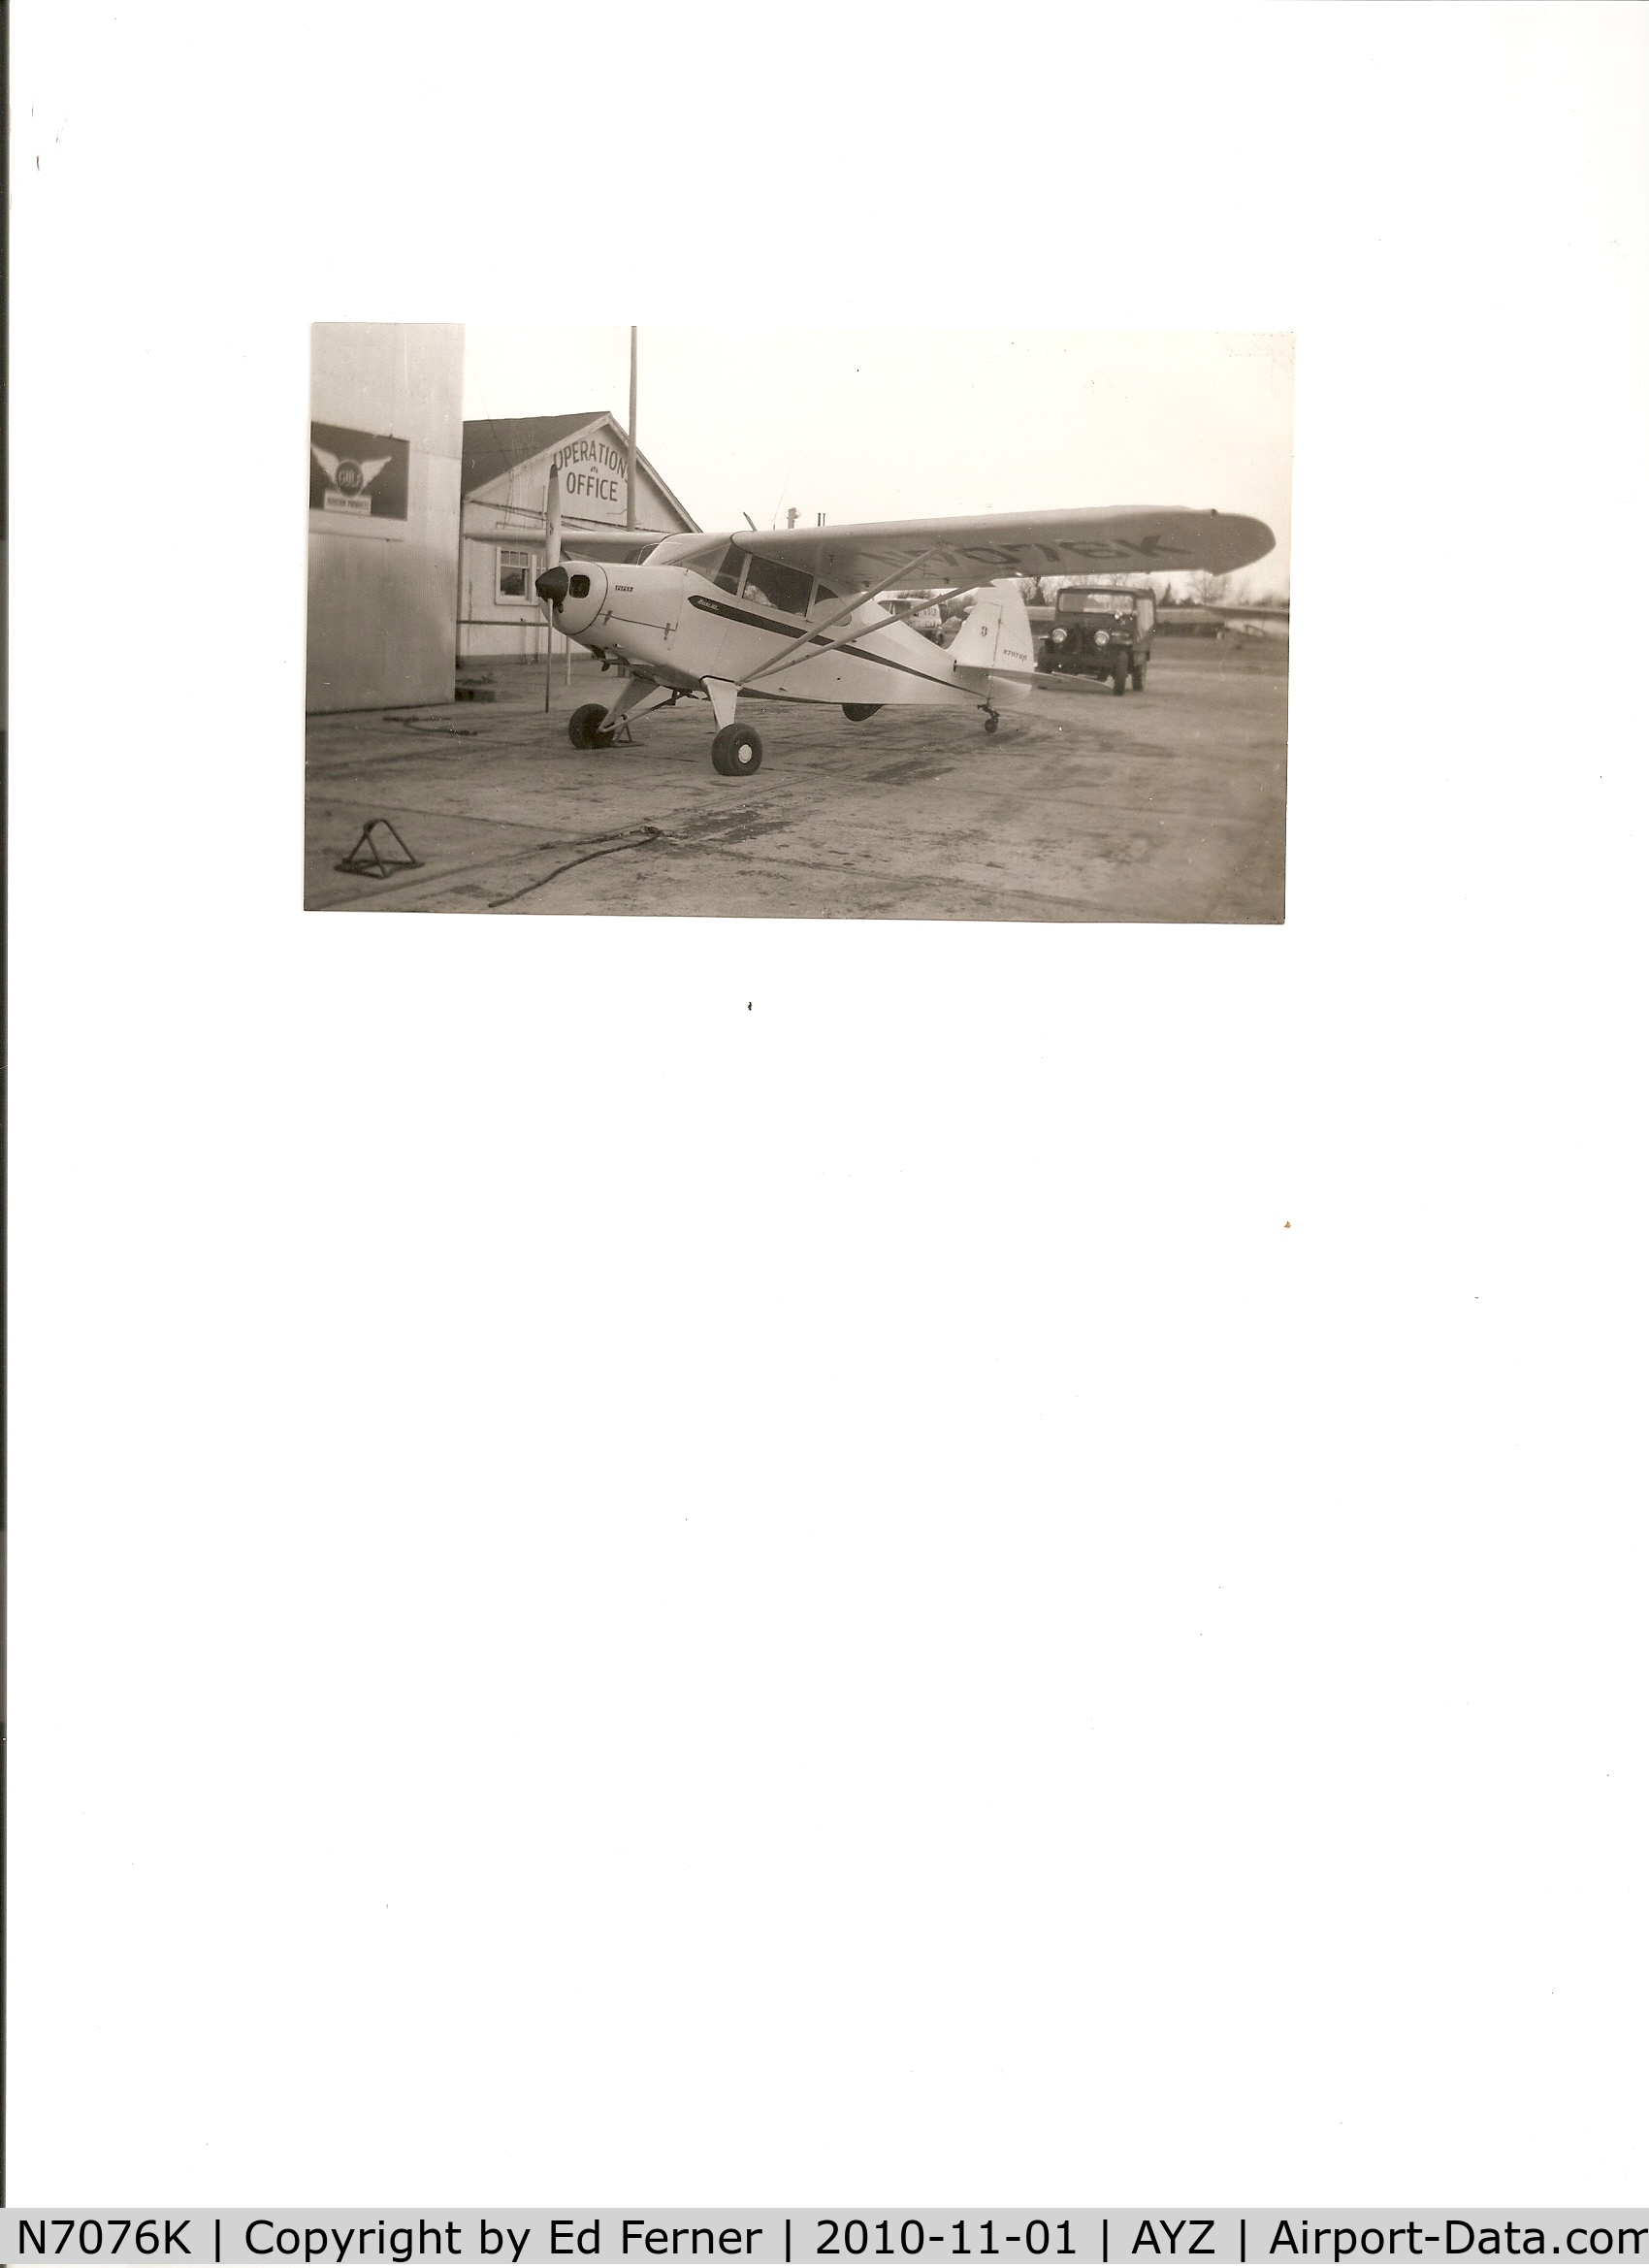 N7076K, 1950 Piper PA-20 Pacer C/N 20-183, On ramp in front of operations office at Zahns Airport, Amityville, Long Island. Photo taken in early 1950's.